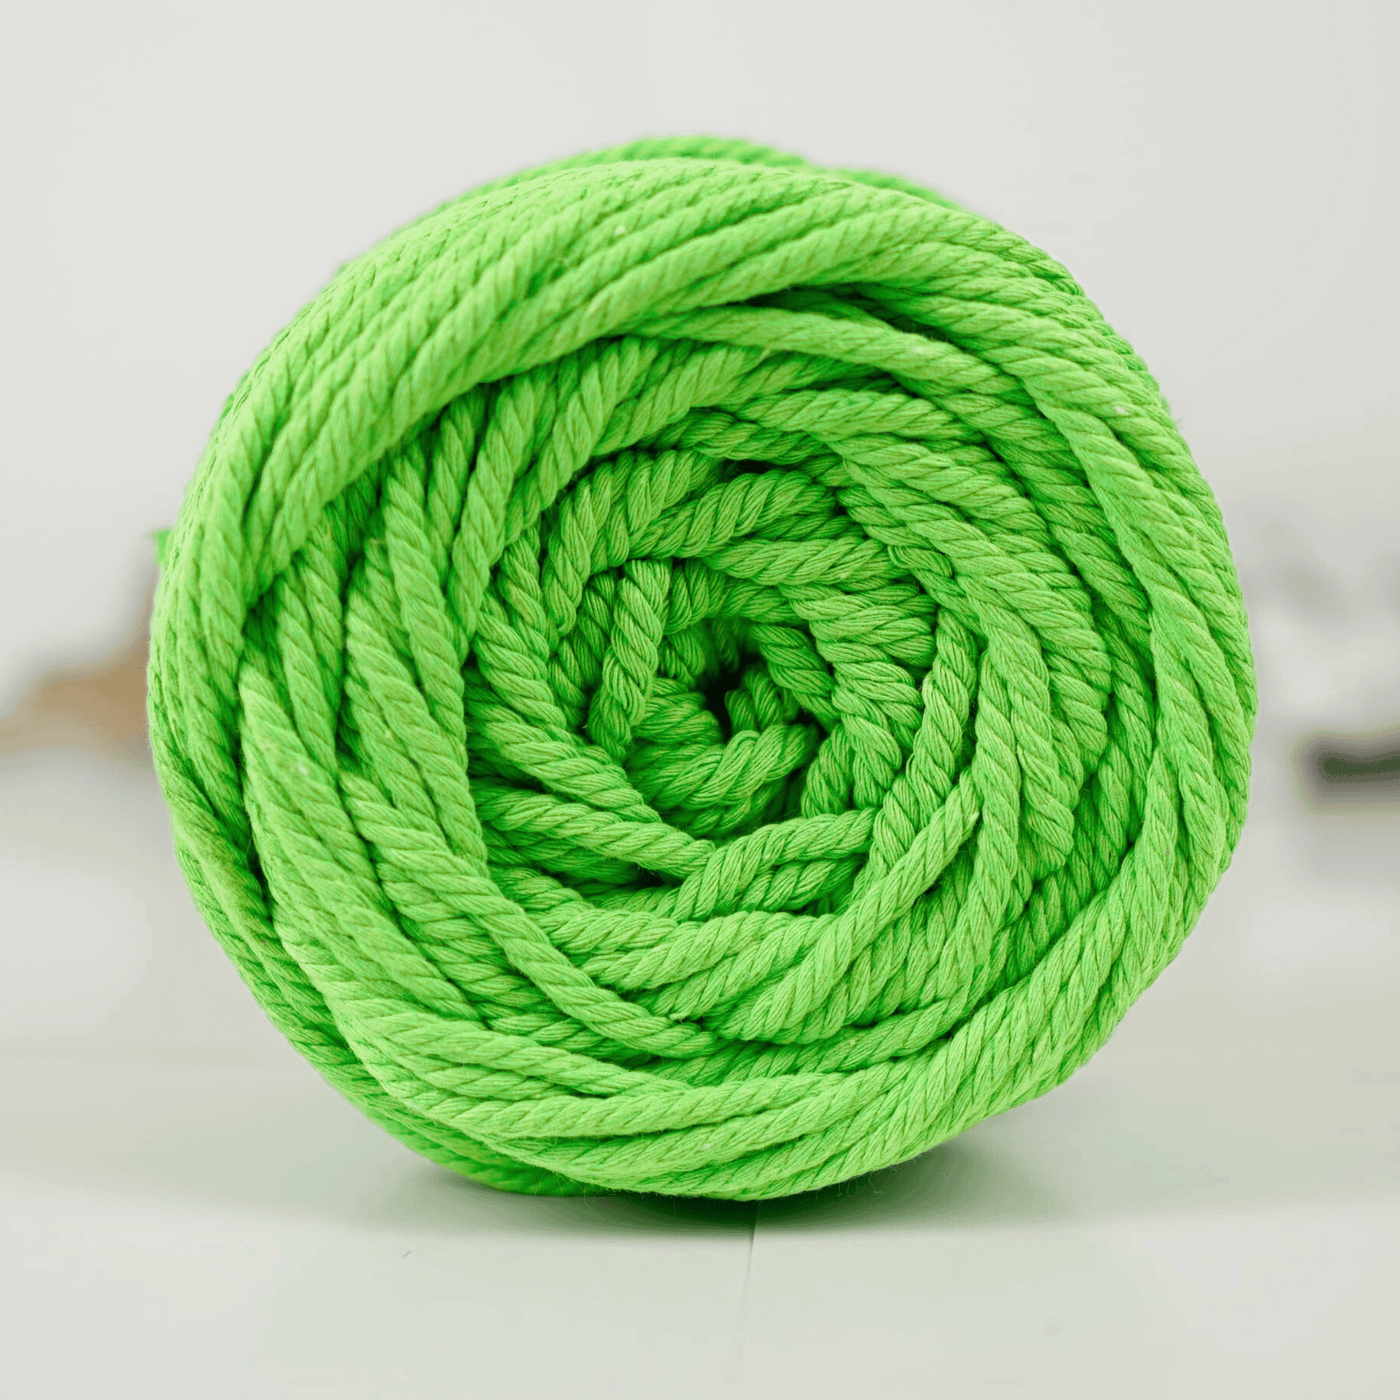 Clearance Vibrant 4mm Multi-ply Cotton Cord (Slime Green)